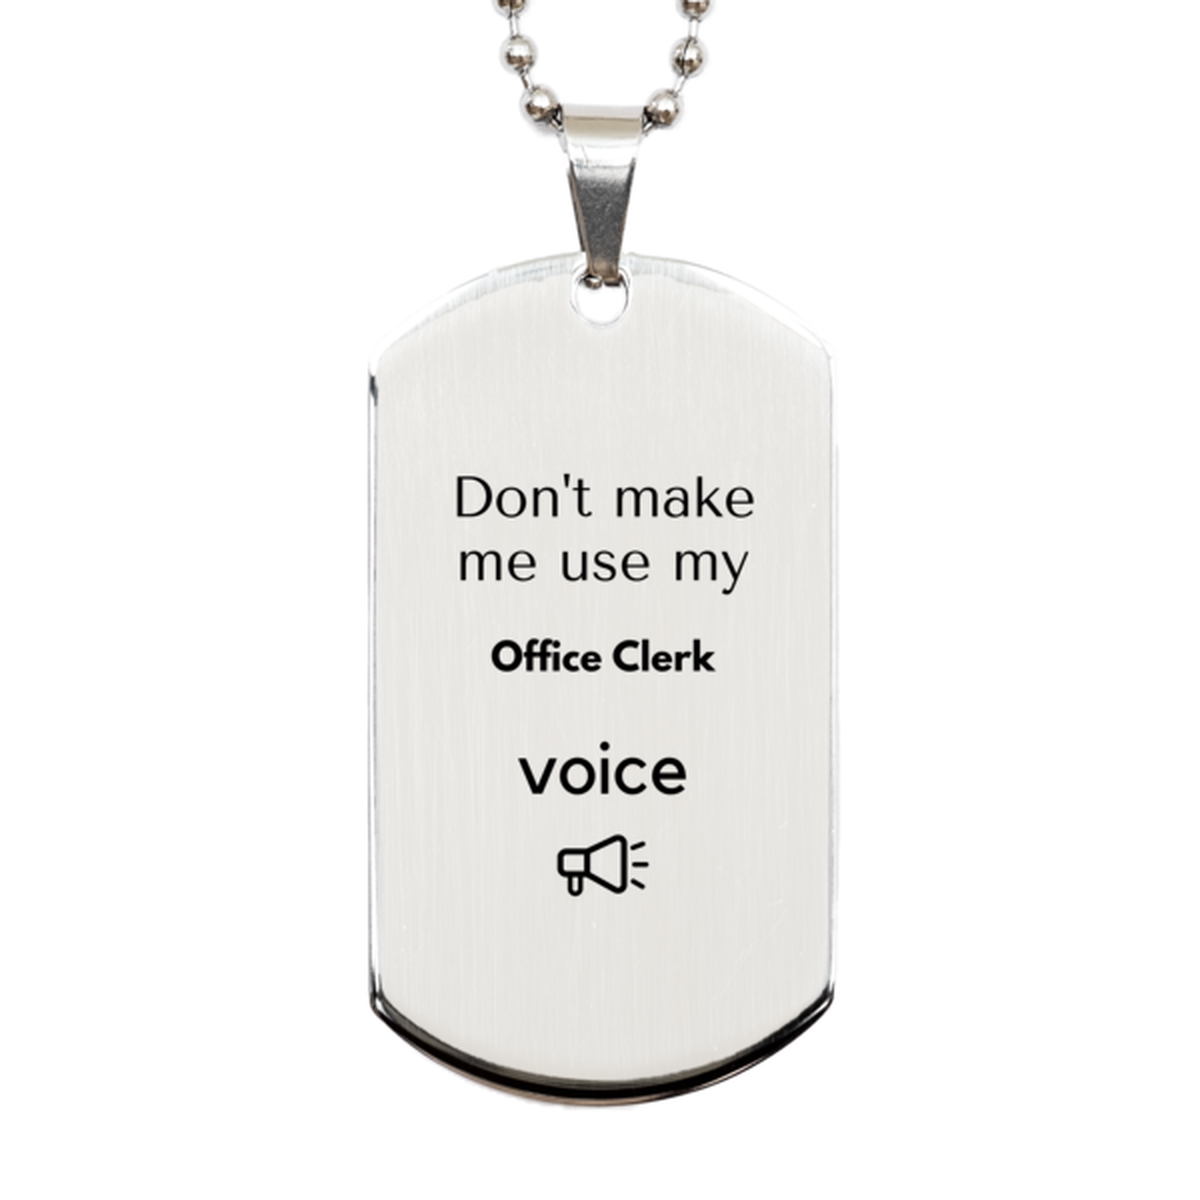 Don't make me use my Office Clerk voice, Sarcasm Office Clerk Gifts, Christmas Office Clerk Silver Dog Tag Birthday Unique Gifts For Office Clerk Coworkers, Men, Women, Colleague, Friends